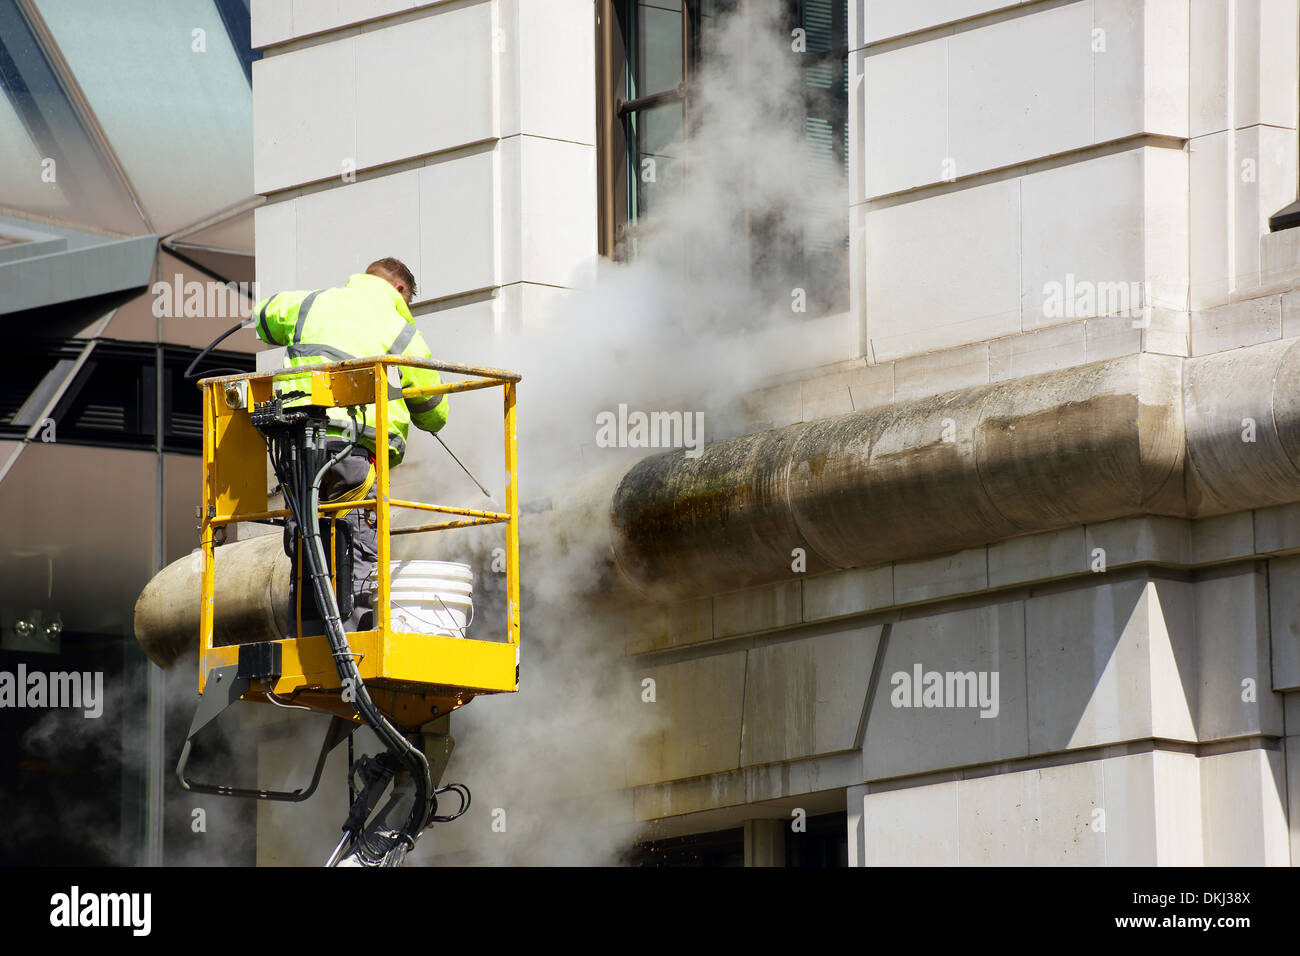 a worker washes the facade of the building Stock Photo